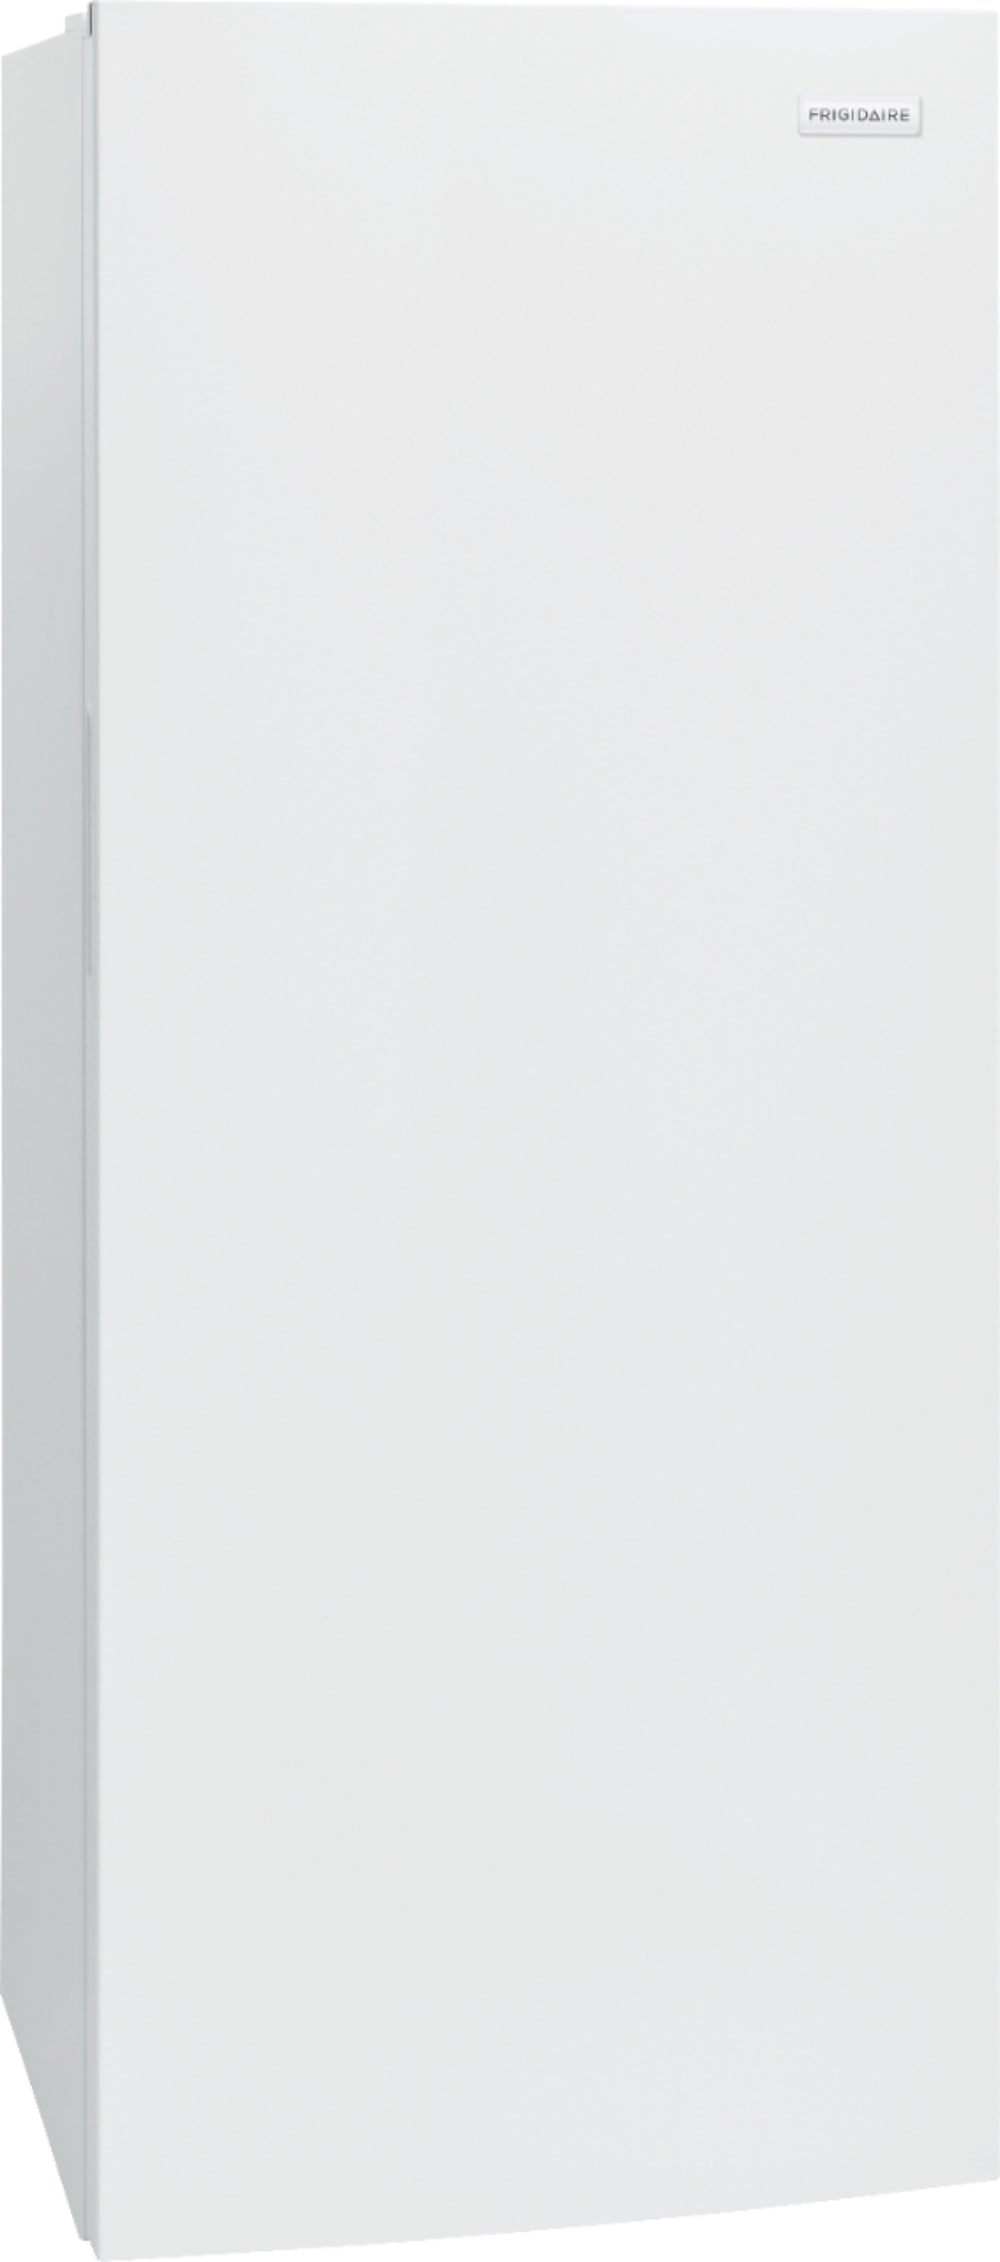 Frigidaire - 13.0 Cu. Ft. Frost-Free Upright Freezer with Interior Light - White_1